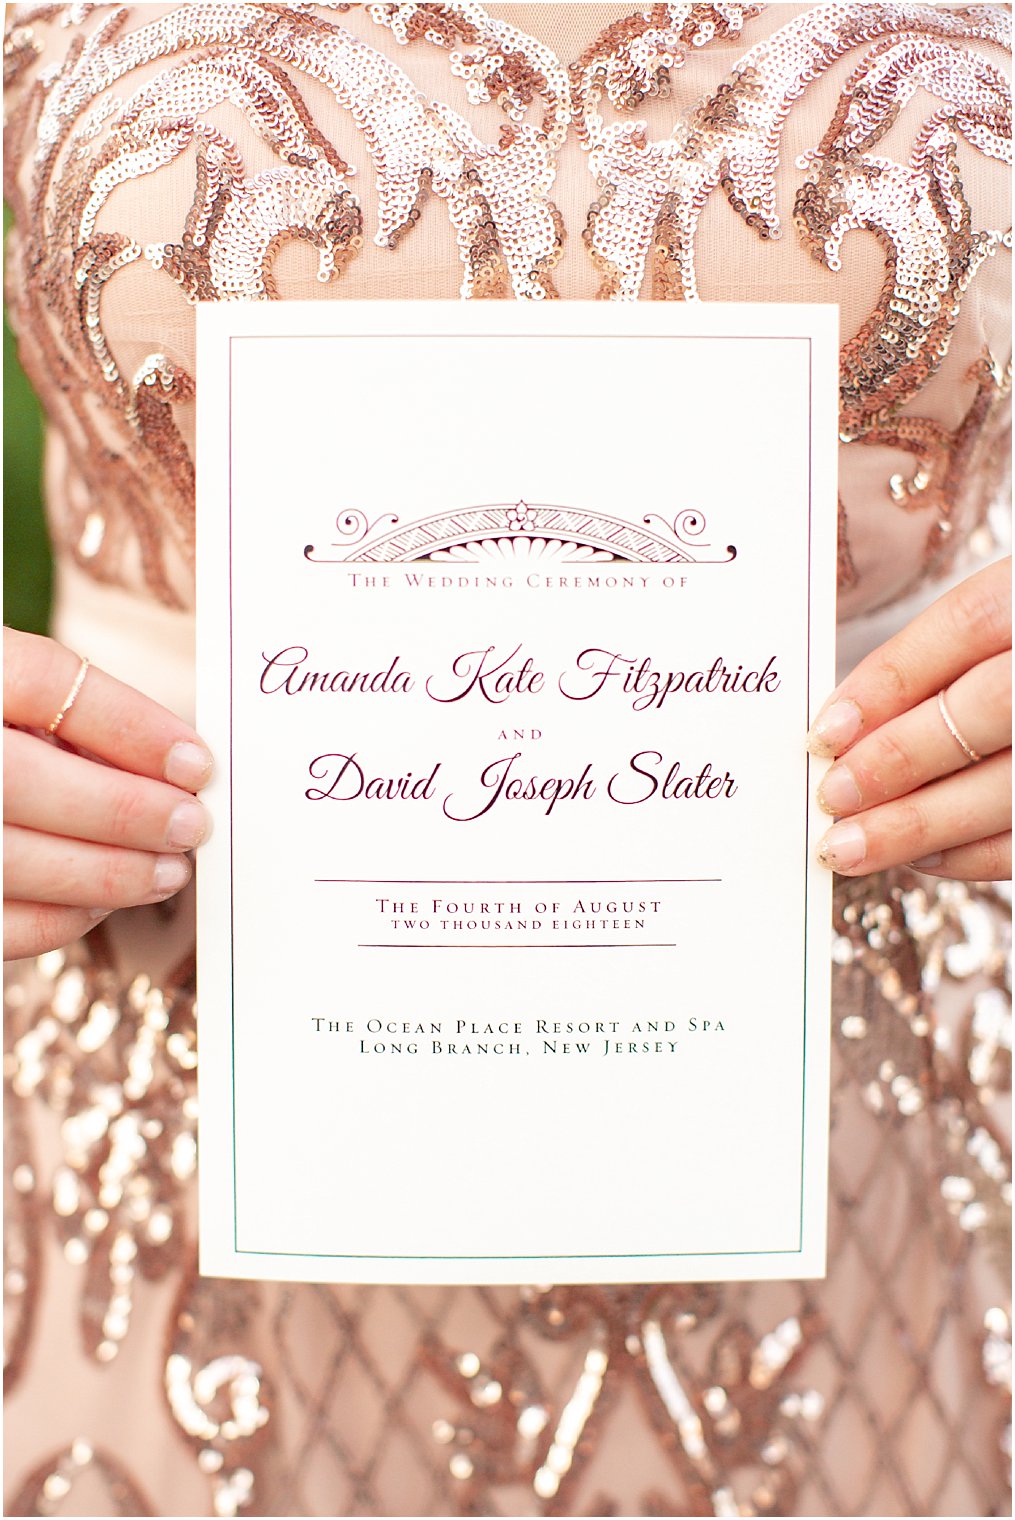 Gatsby inspired wedding program for Ocean Place Resort and Spa wedding by Perfectly Invited